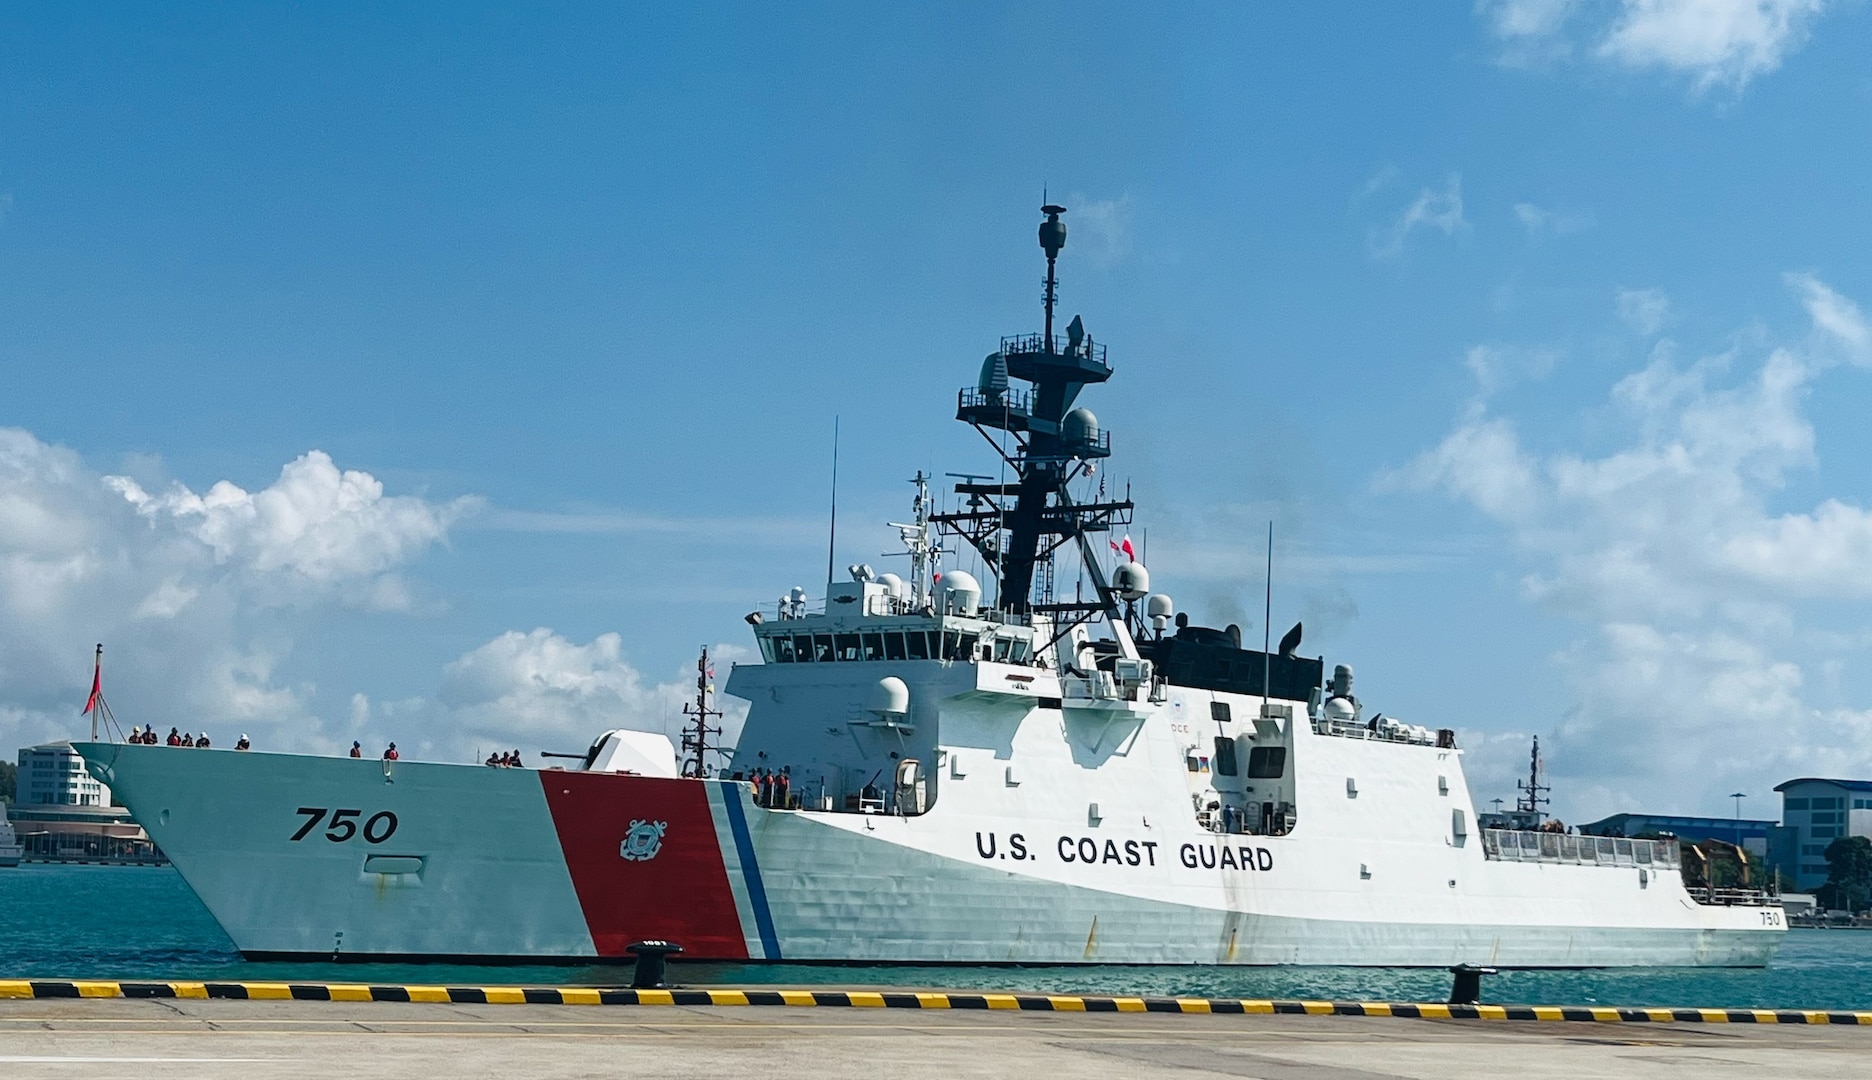 U.S. Coast Guard Cutter Bertholf (WMSL 750) arrives at Changi Naval Base in Singapore, Feb. 25, 2024. The Bertholf moored next to USS Gabrielle Giffords (LCS 10), a U.S. Navy Littoral Combat Ship, also in the region to support an open Indo-Pacific region. (U.S. Coast Guard photo by Cmdr. Trevor Parra)